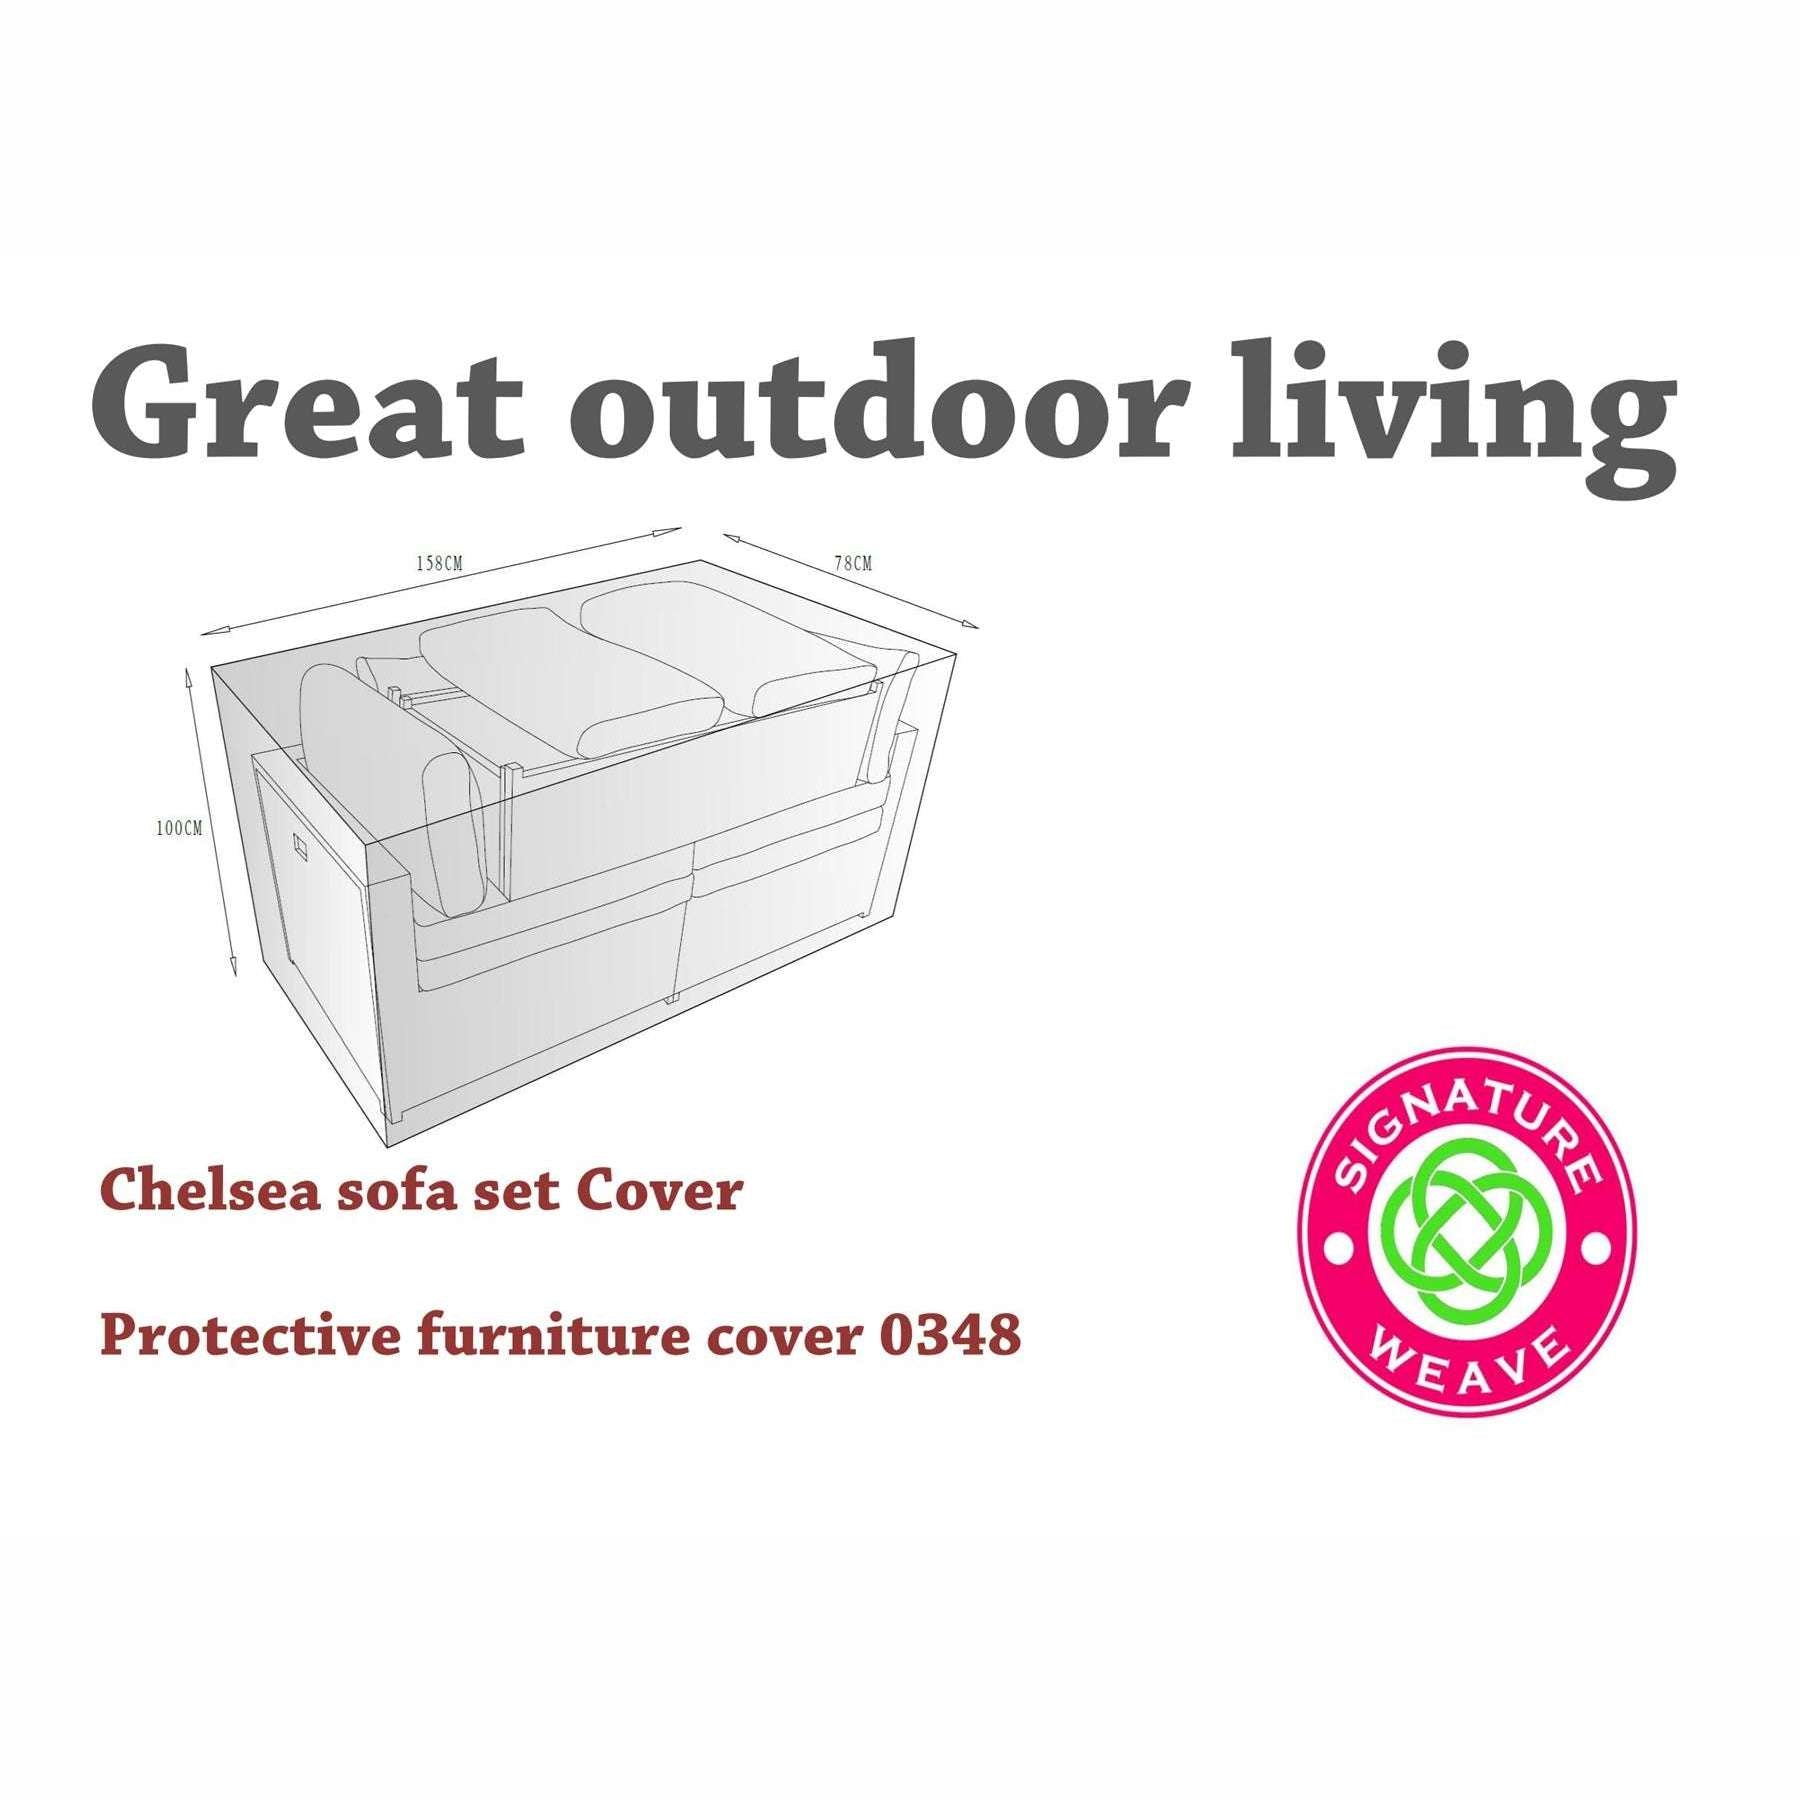 Exceptional Garden:Signature Weave Chelsea Furniture Cover